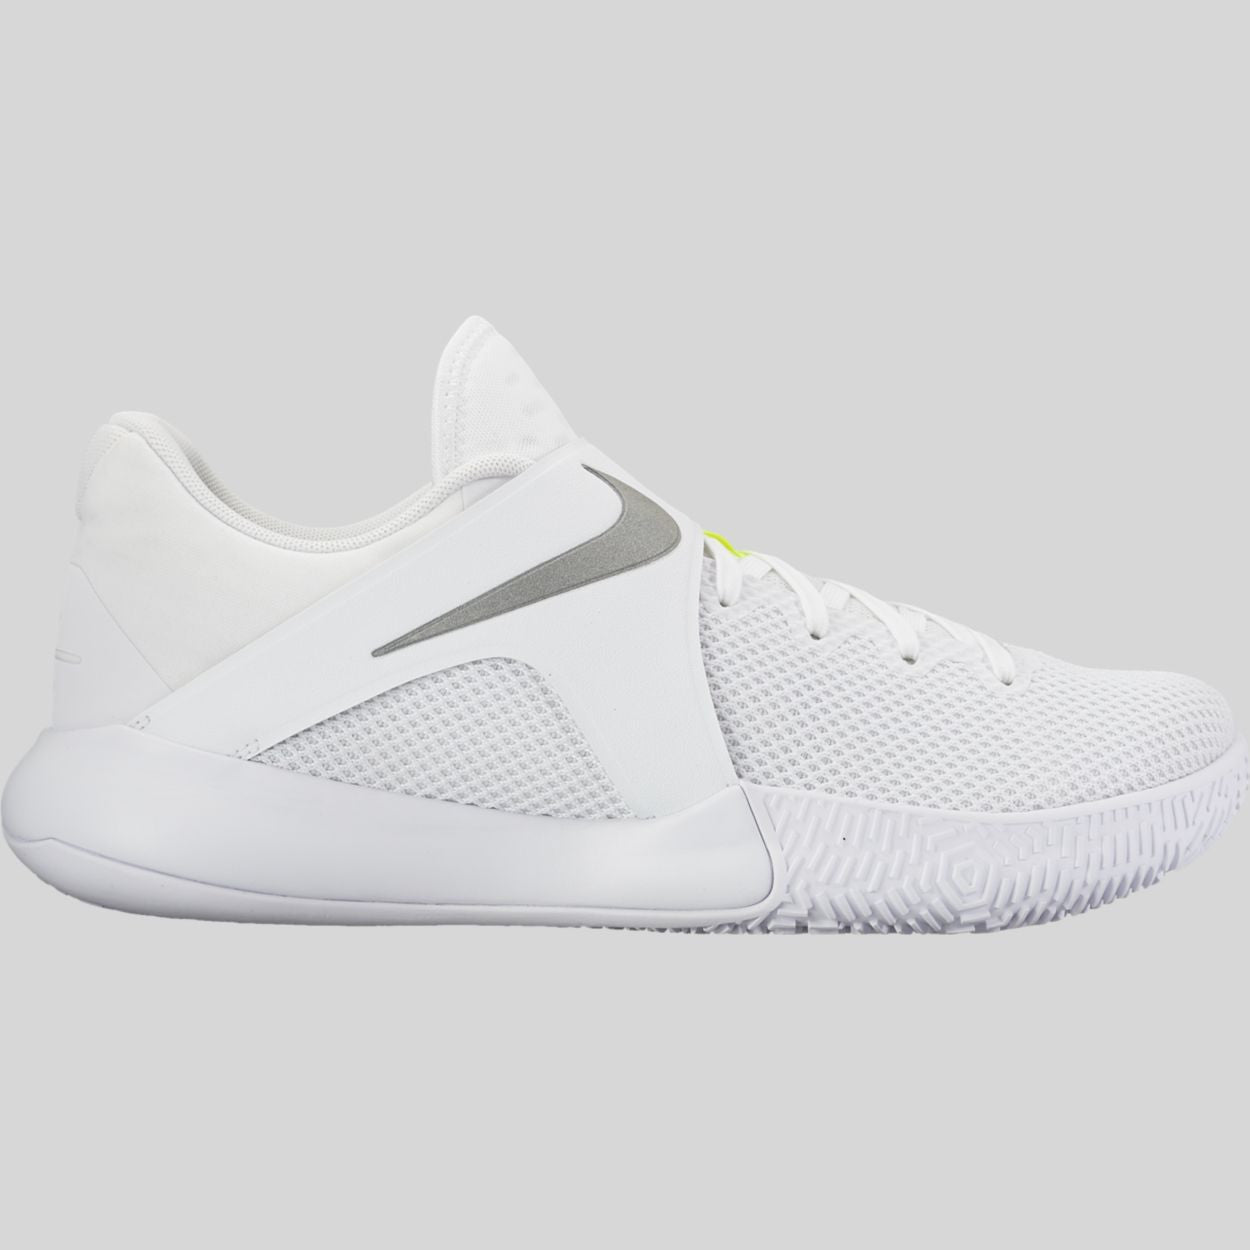 Nike Zoom Live EP White Reflect Silver 